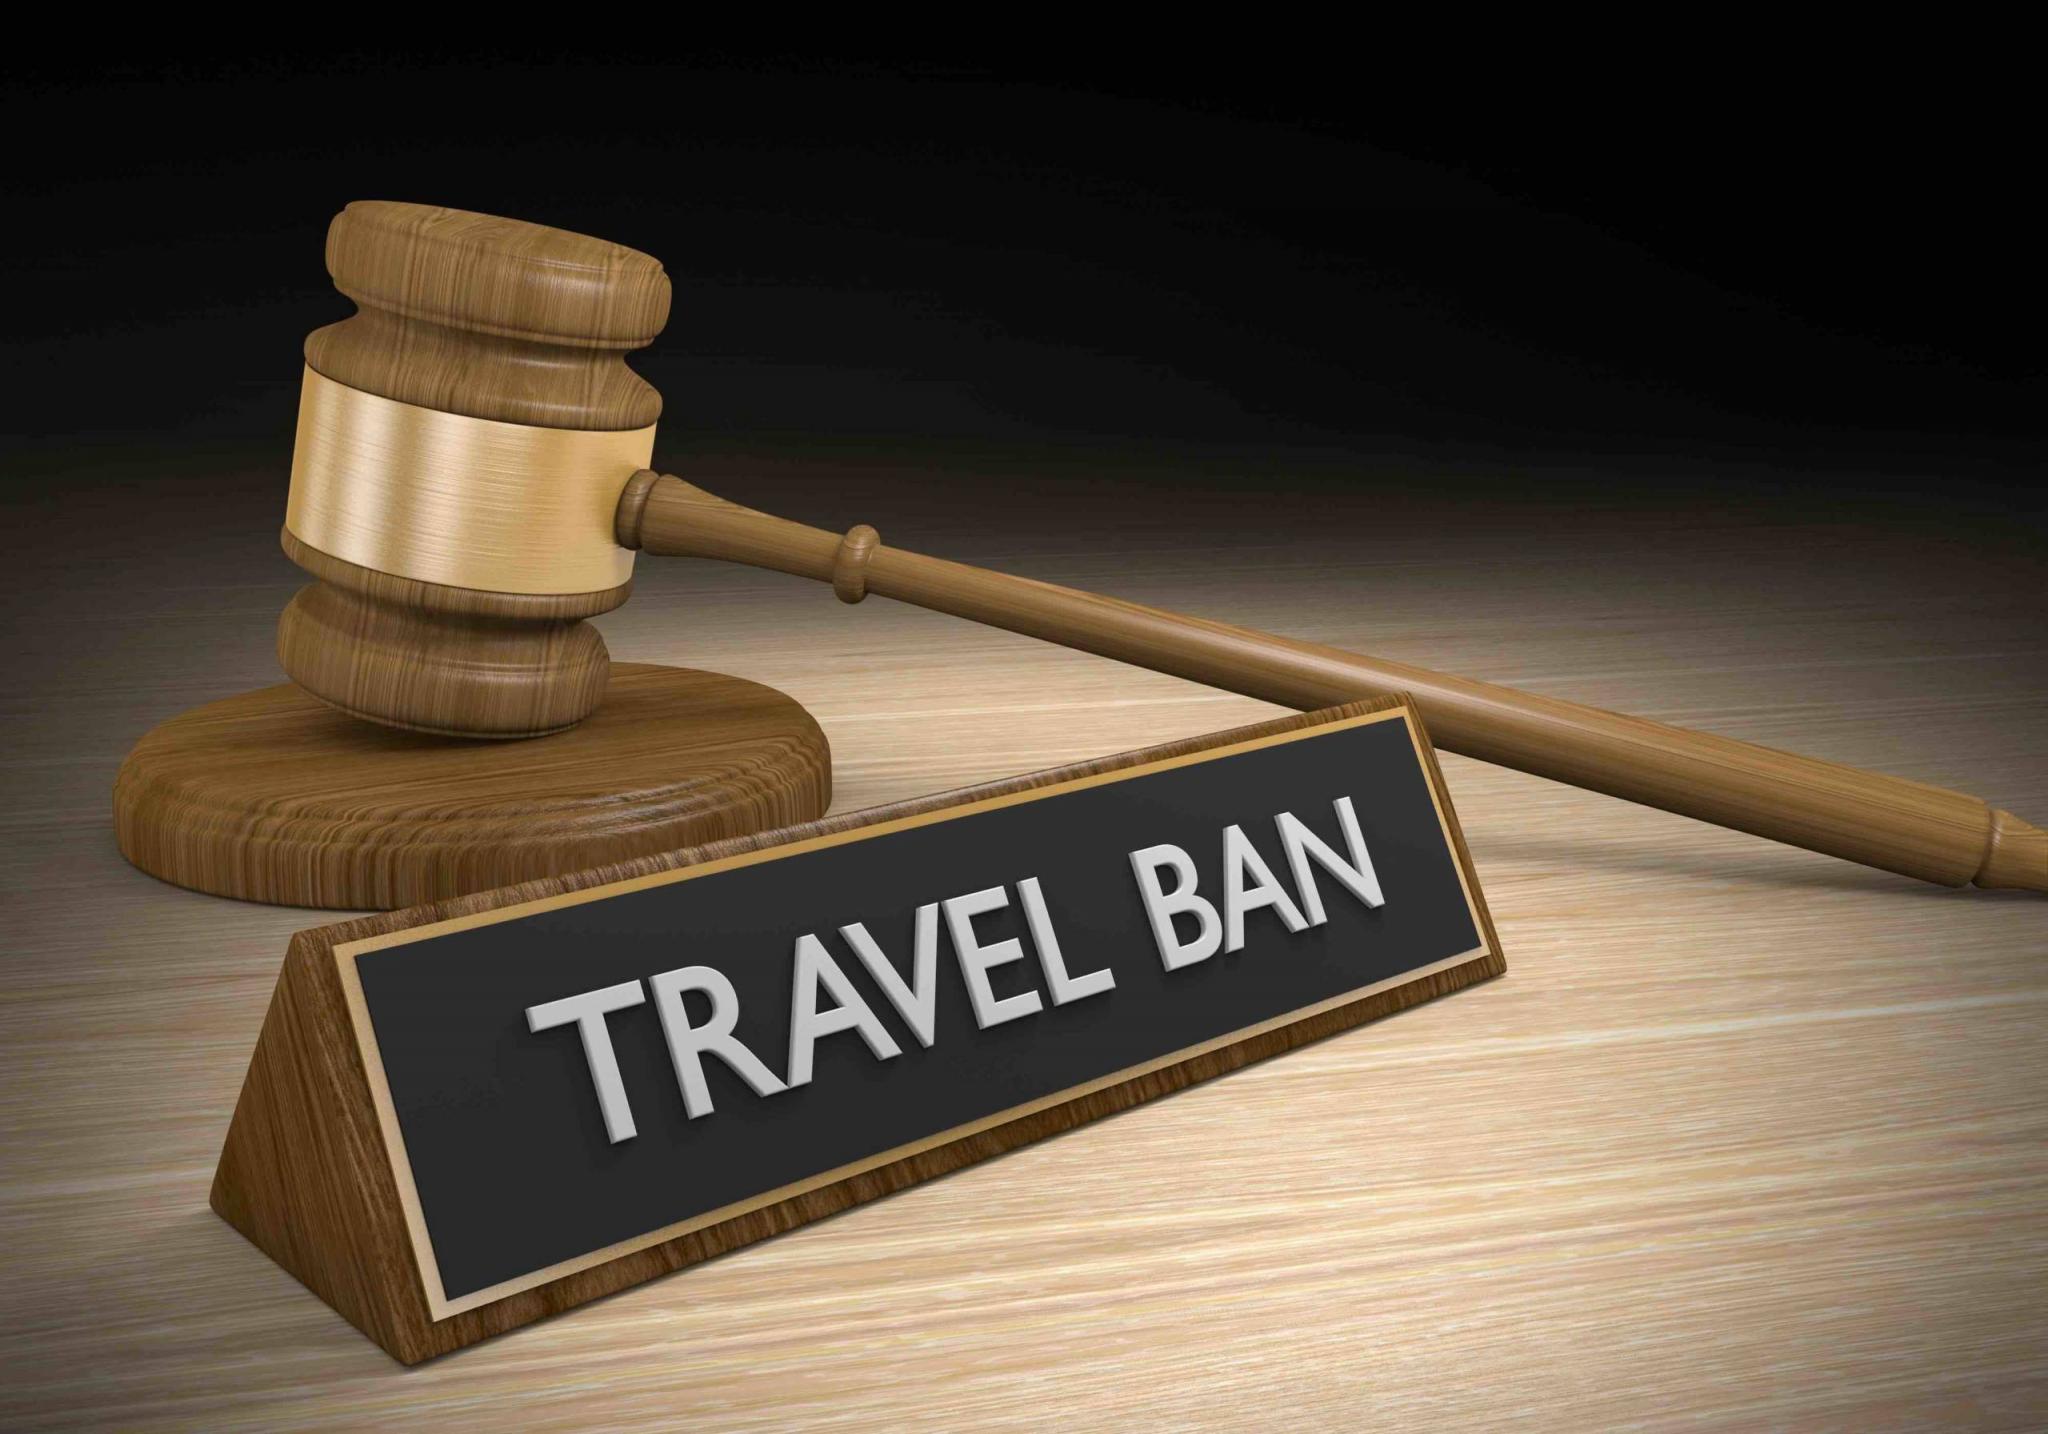 a travel ban meaning